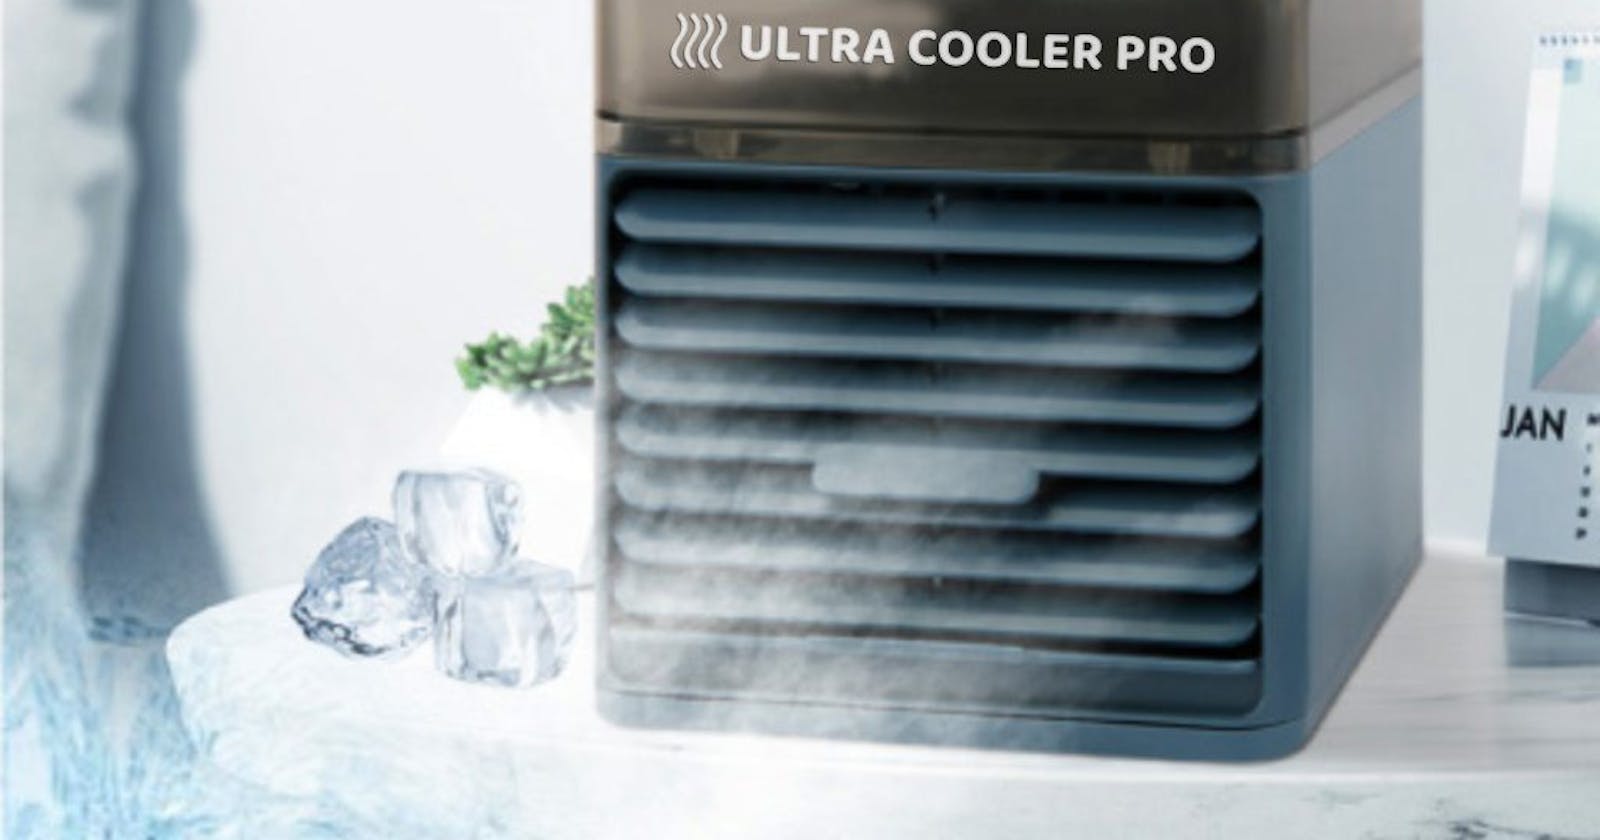 Ultra Cooler Pro - Stay Chill With The Portable Ultra Cooler Pro!